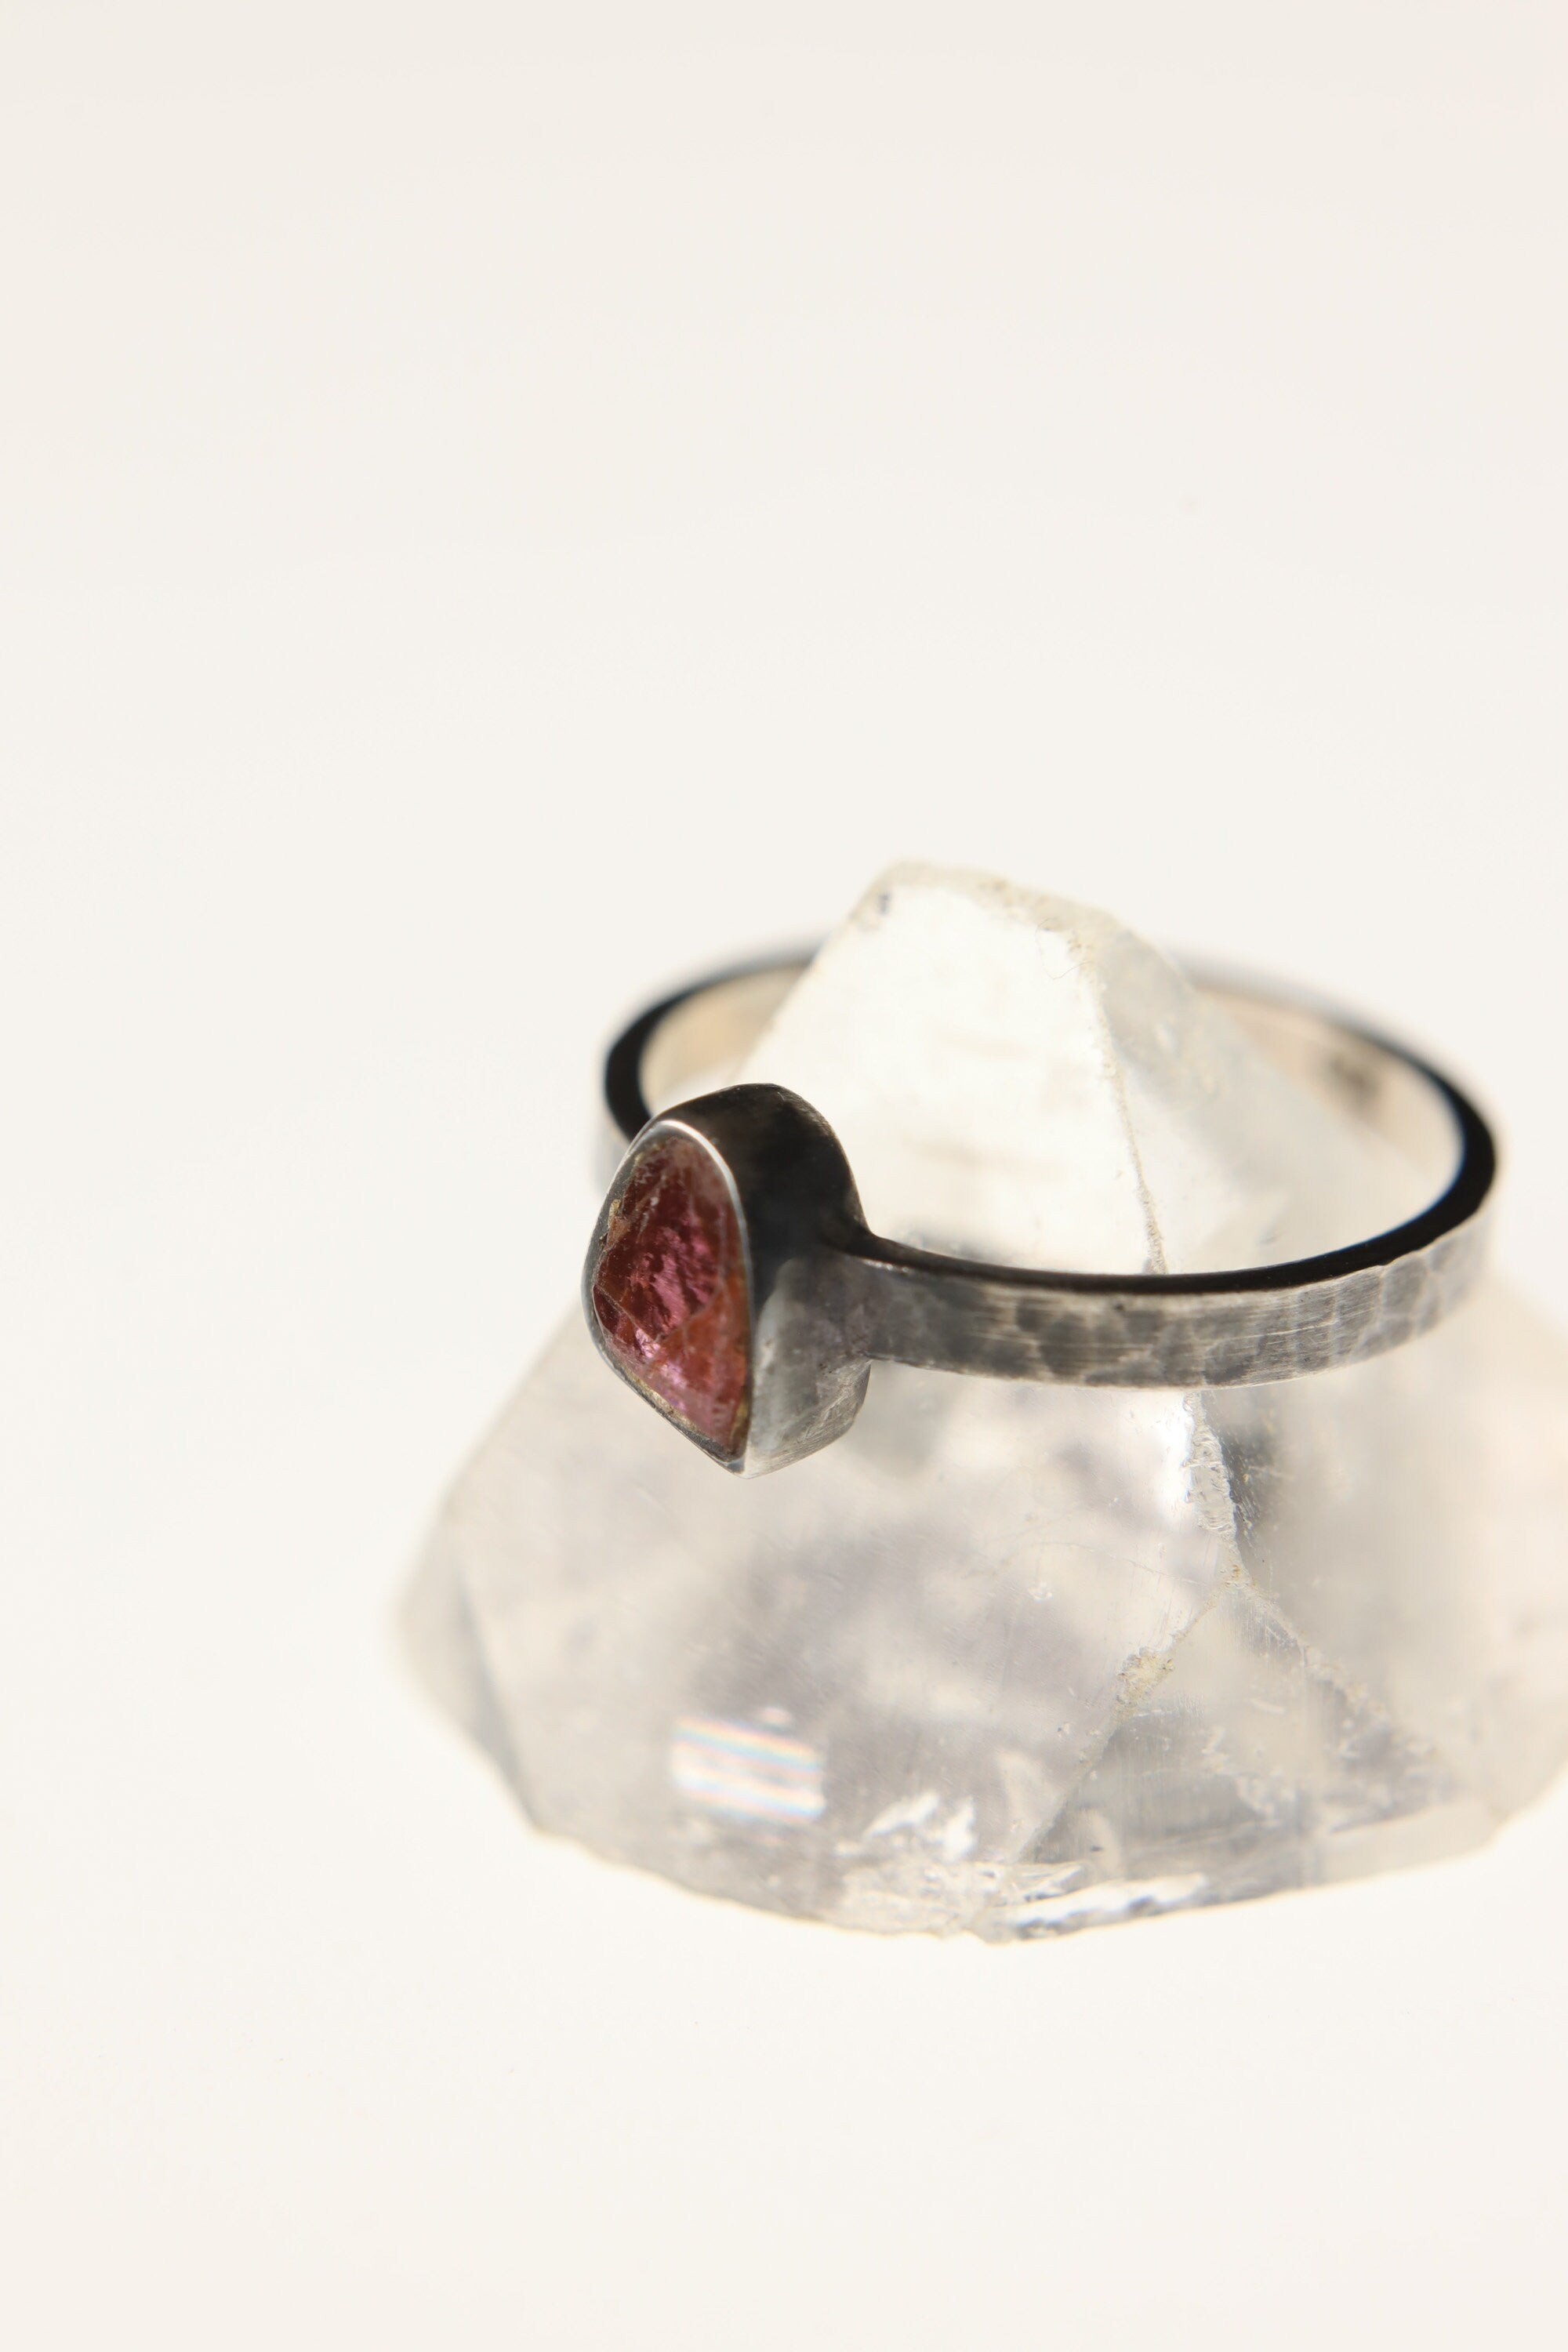 Eternal Blush - Sterling Silver Ring with Pink Tourmaline - Size 6 US - NO/03